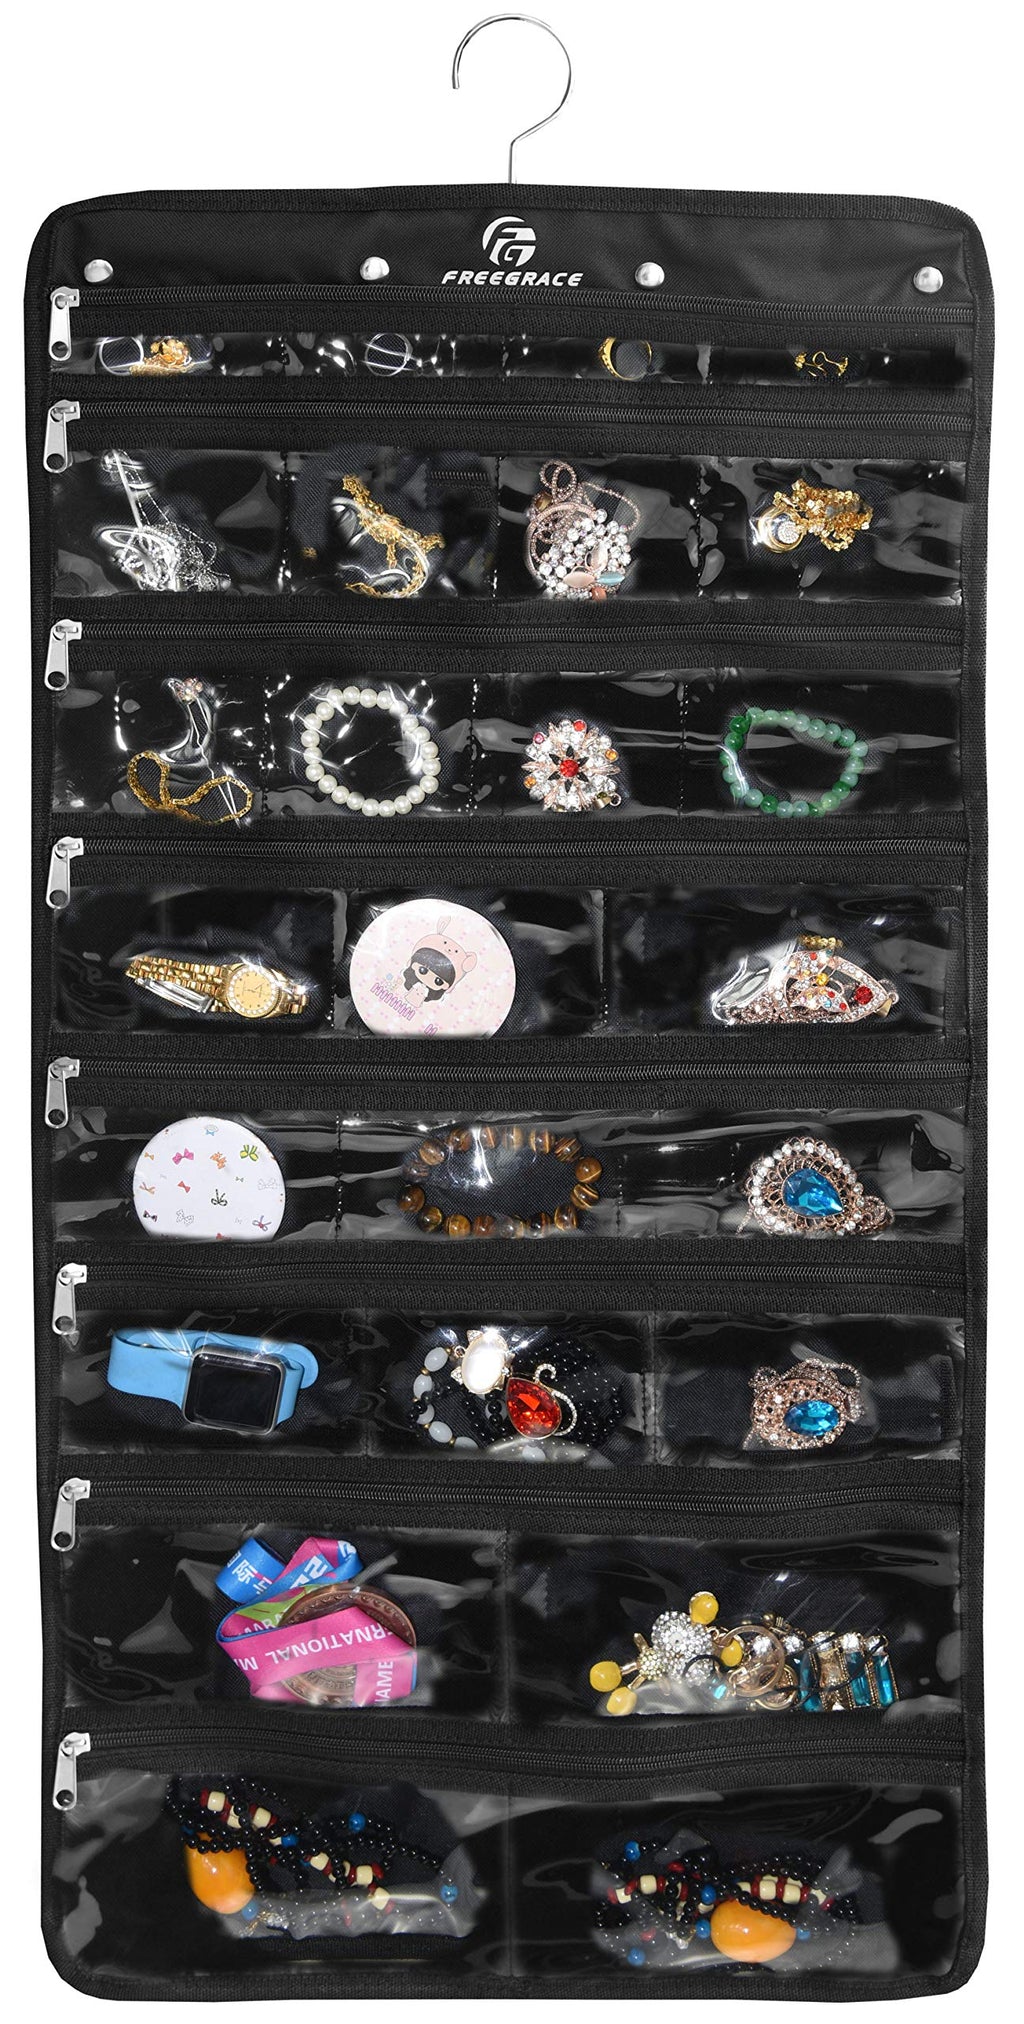 [Australia] - Premium Hanging Jewelry Organizer By Freegrace - Revolving Hanger - Secure Zipper Closure - 25 Pockets & 23 Hooks - Foldable Storage & Display Solution - Perfect For All Jewelry & Bijoux - Black Black (25 Pockets and 23 Hooks) 